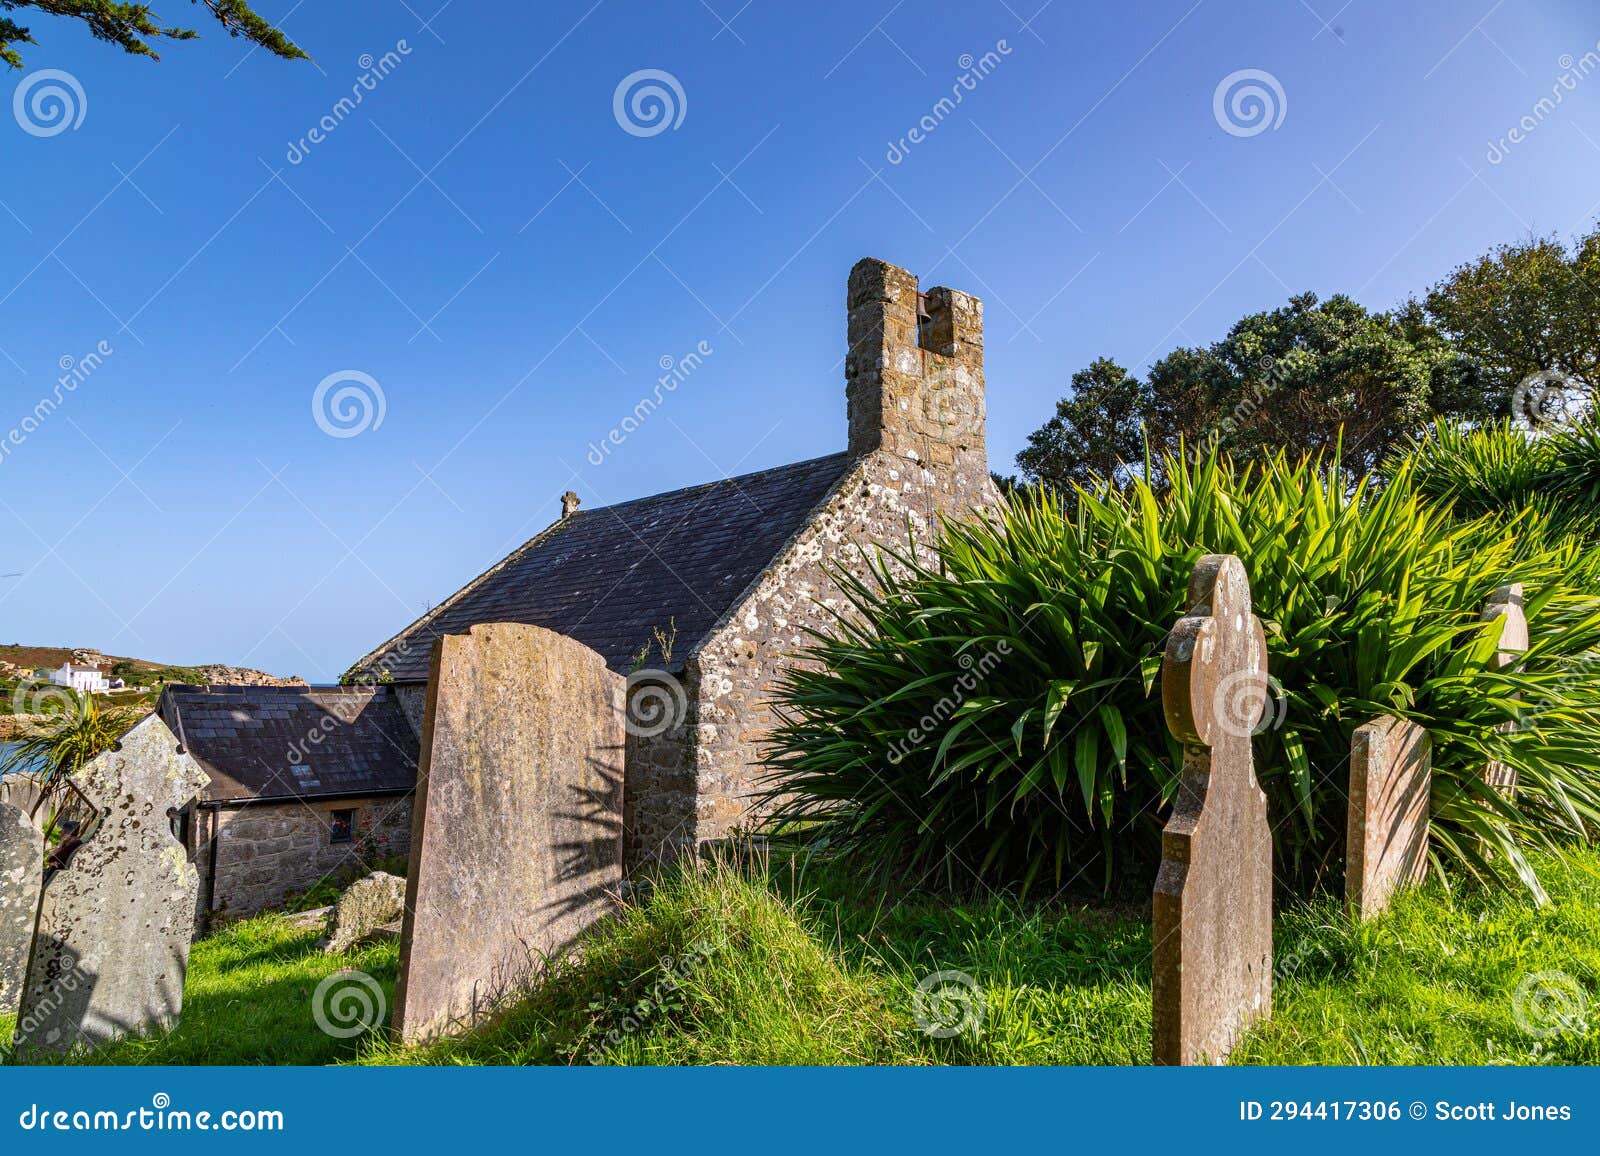 old church and graveyard in the scilly isles